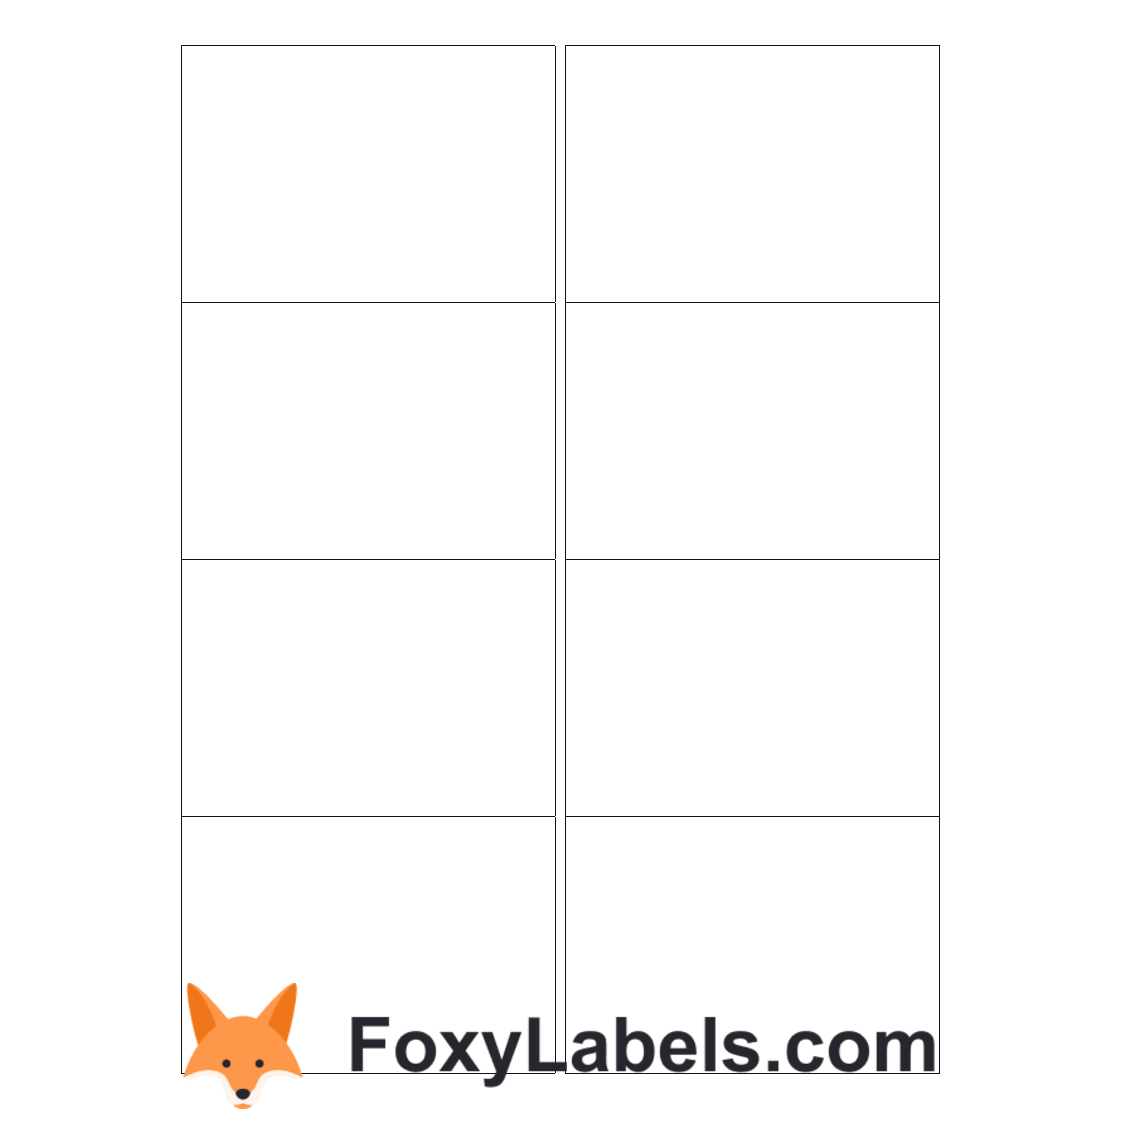 Avery J8165 label template for Google Docs